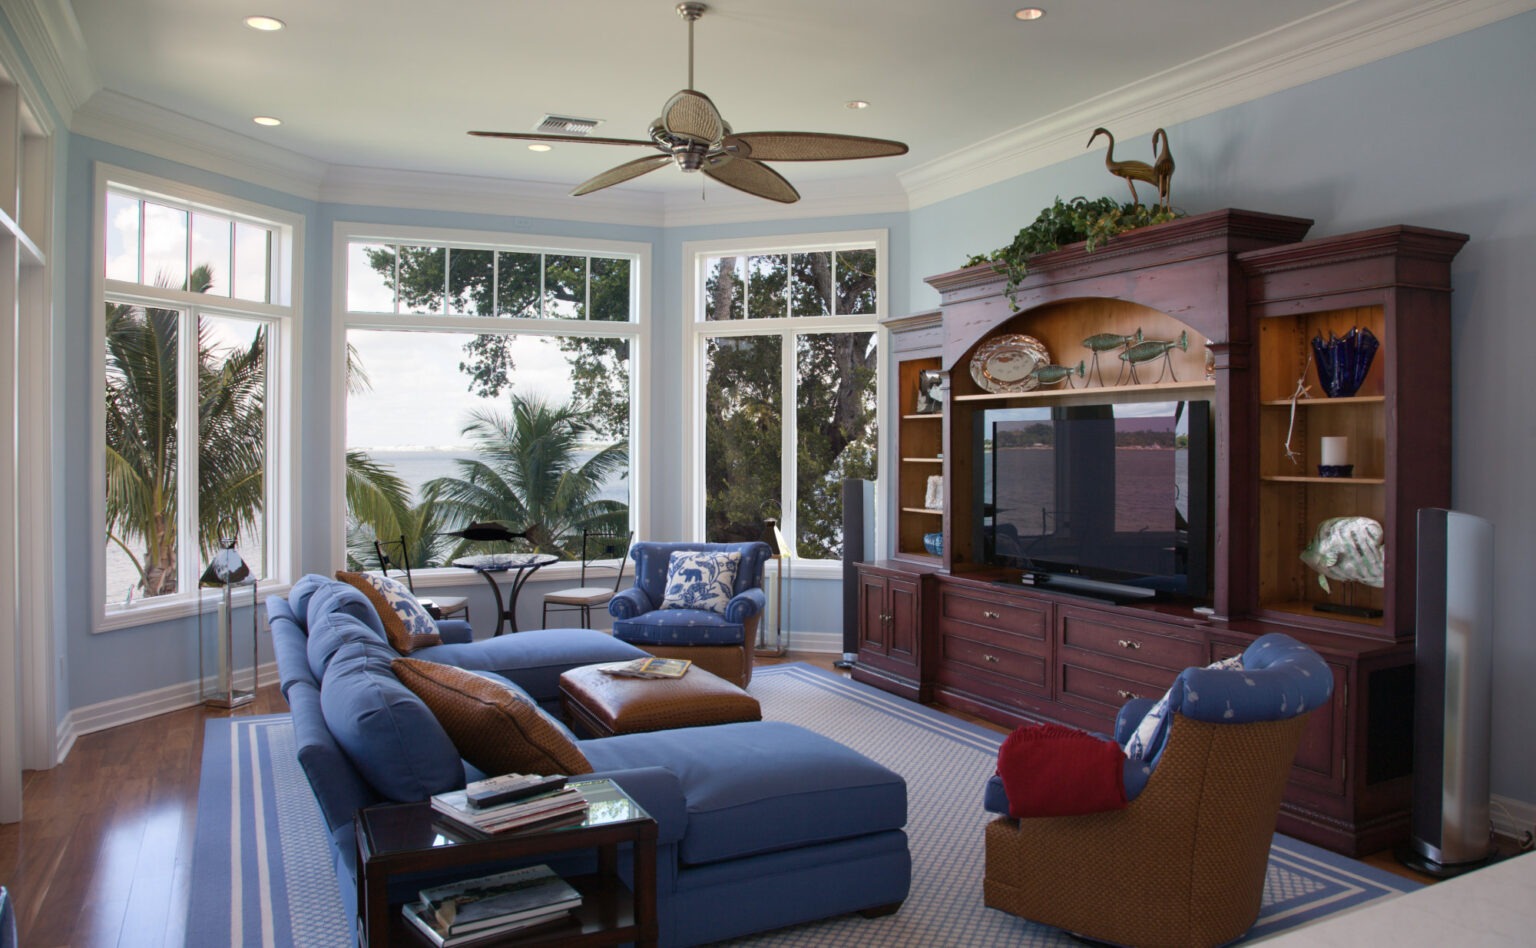 interior view of a family room